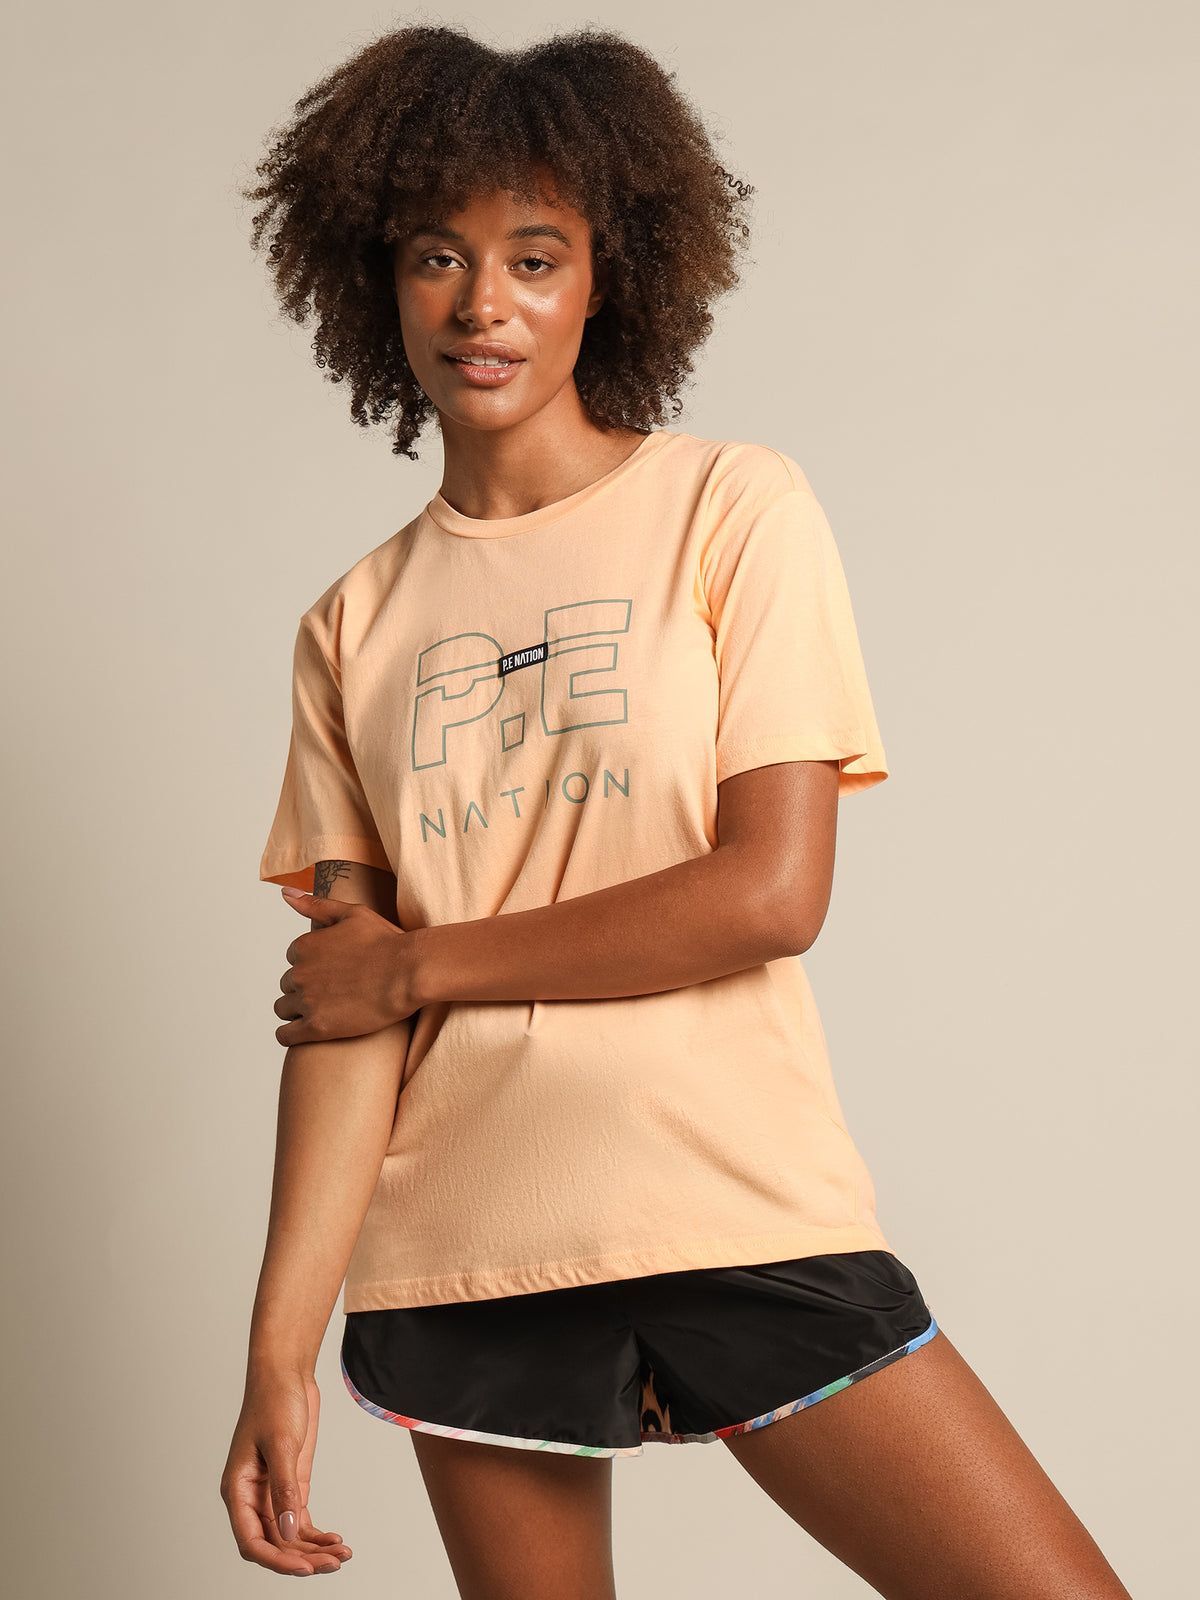 Heads Up T-Shirt in Pastel Peach